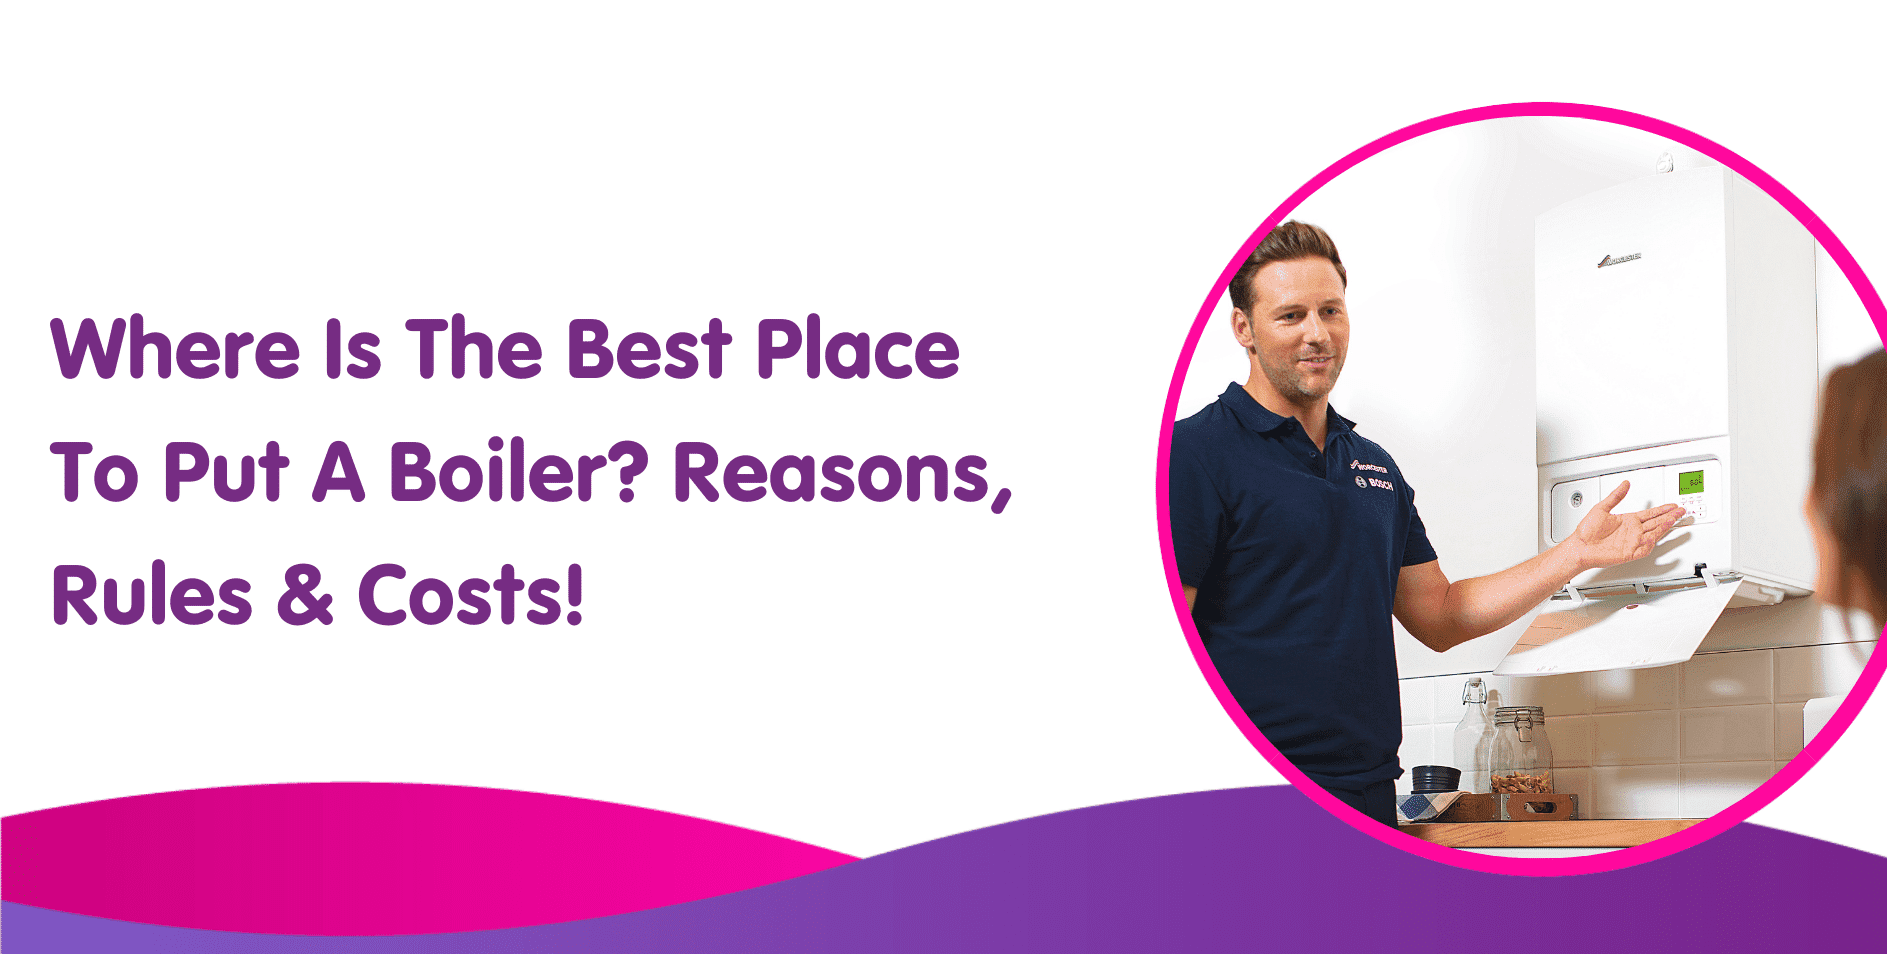 Where Is The Best Place To Put A Boiler? Reasons, Rules & Costs!